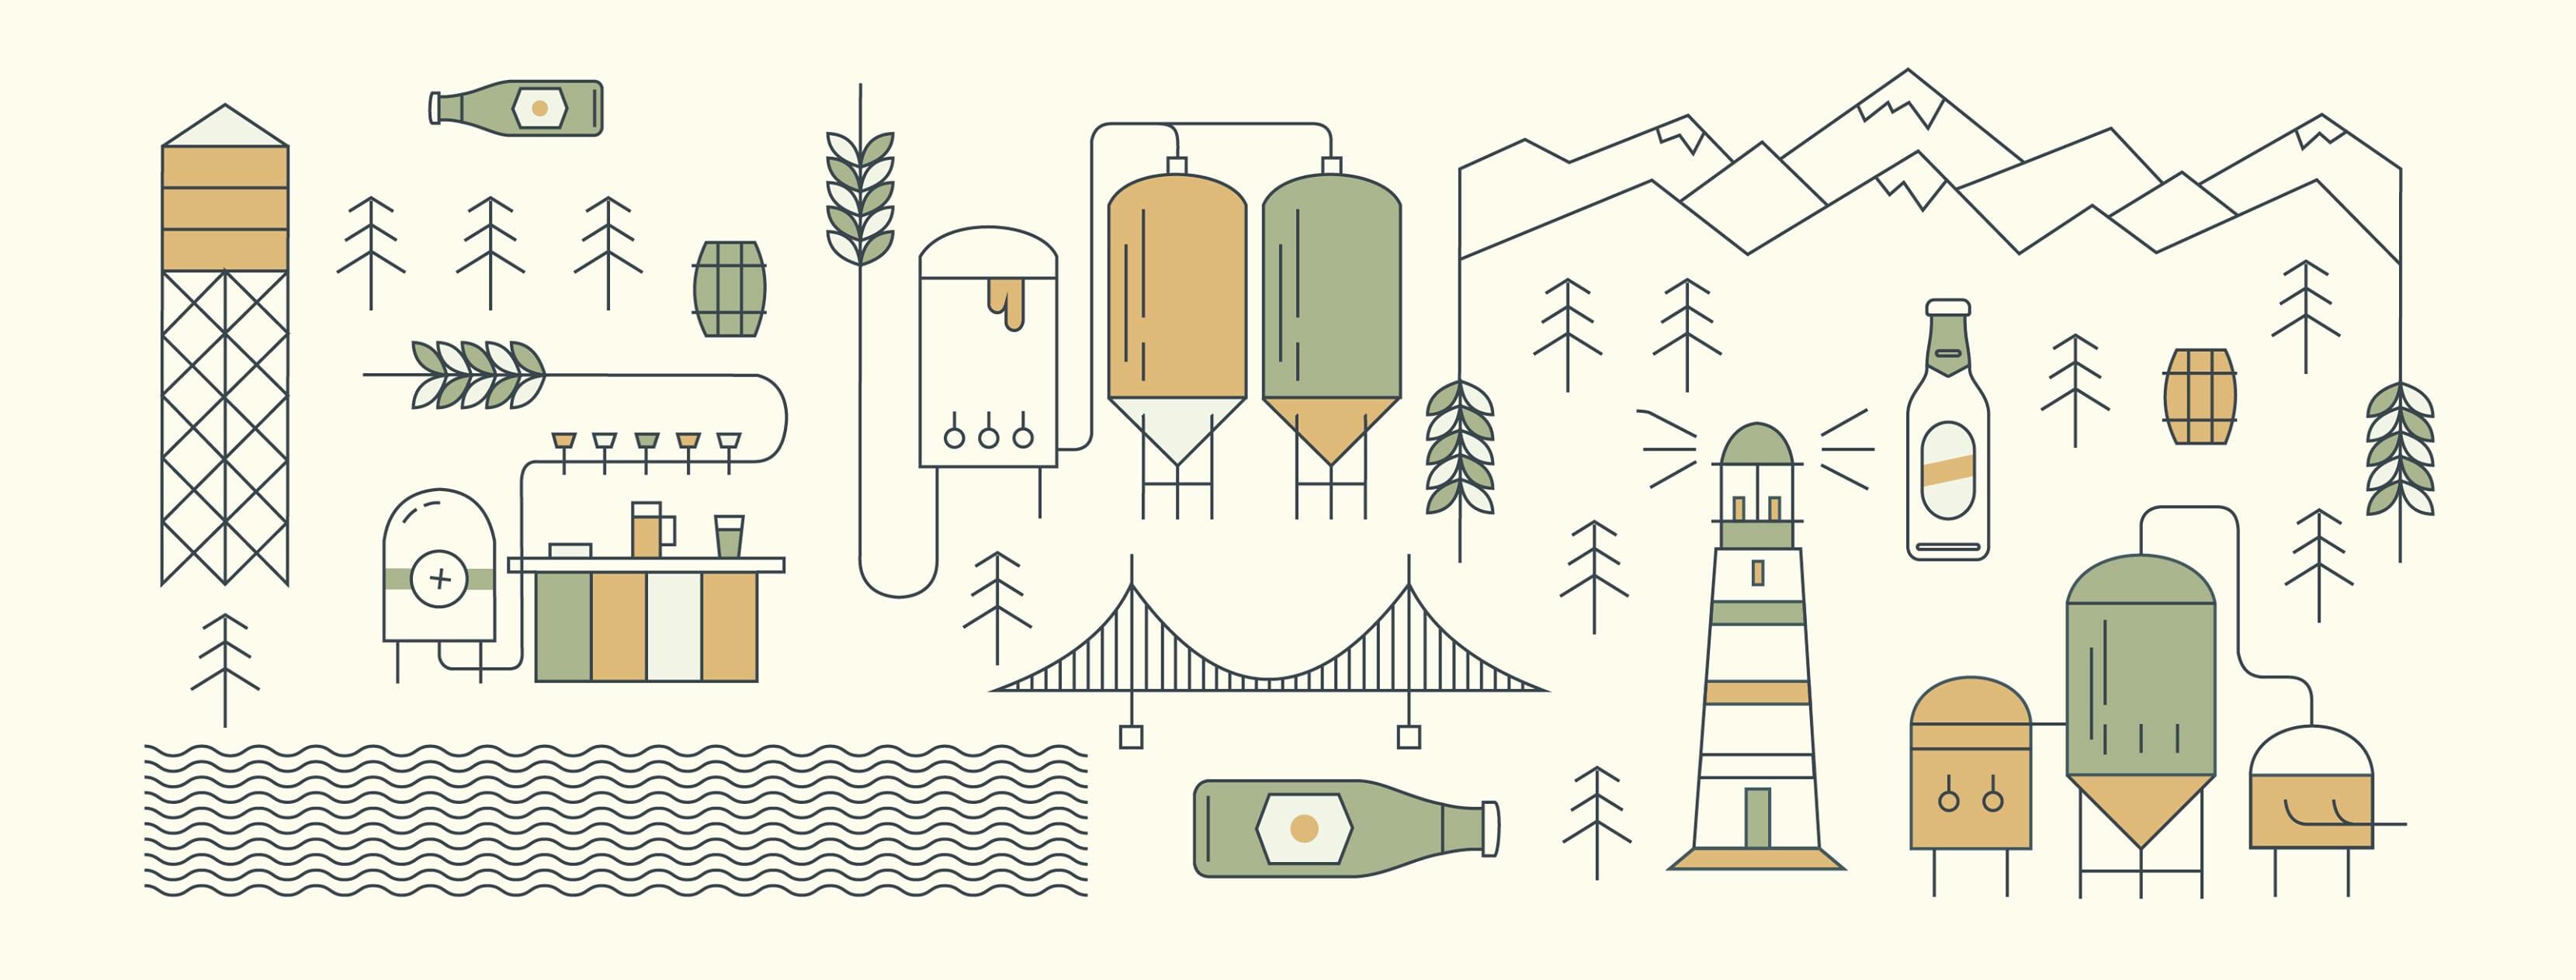 promotional illustration of Vancouver North Shore landmarks and brewery equipment for Craft Beer Week 2019